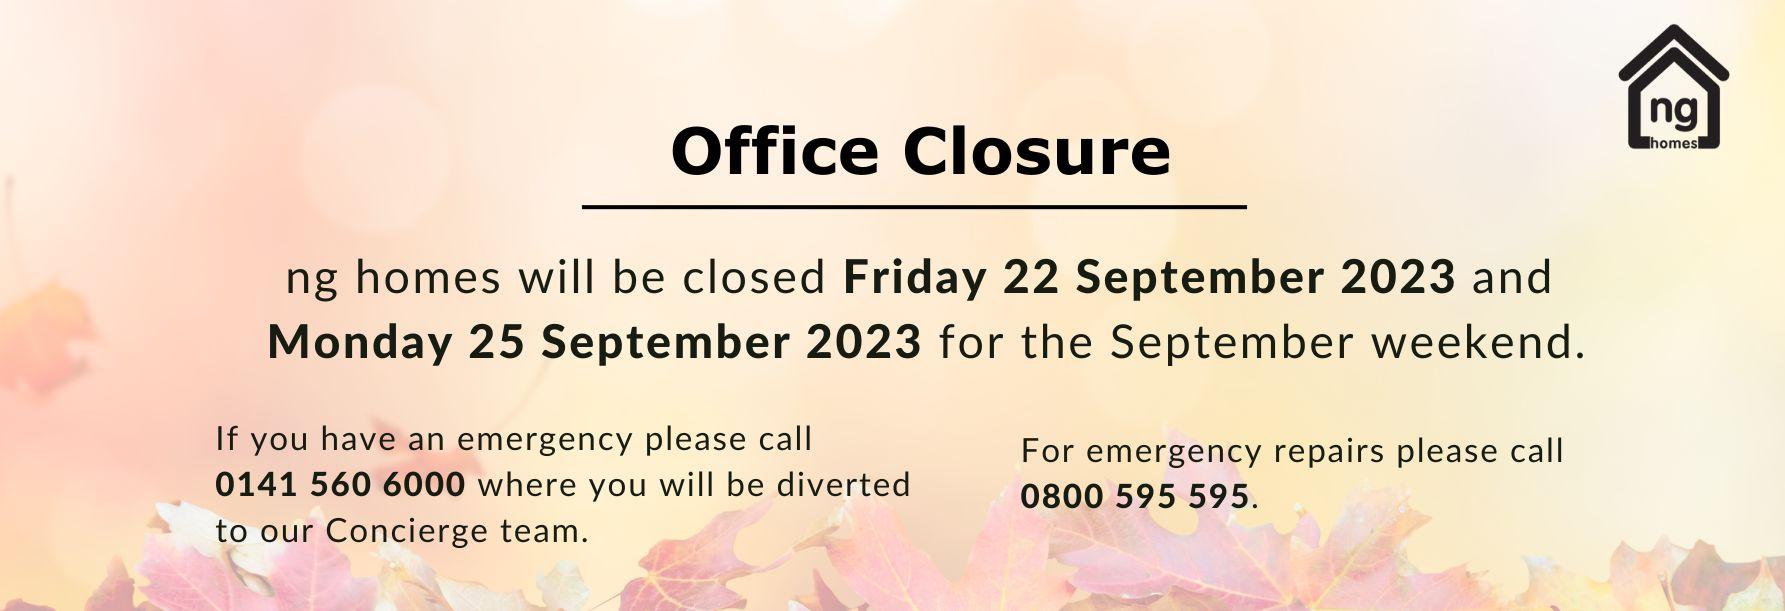 Graphic with advise on upcoming September office closure